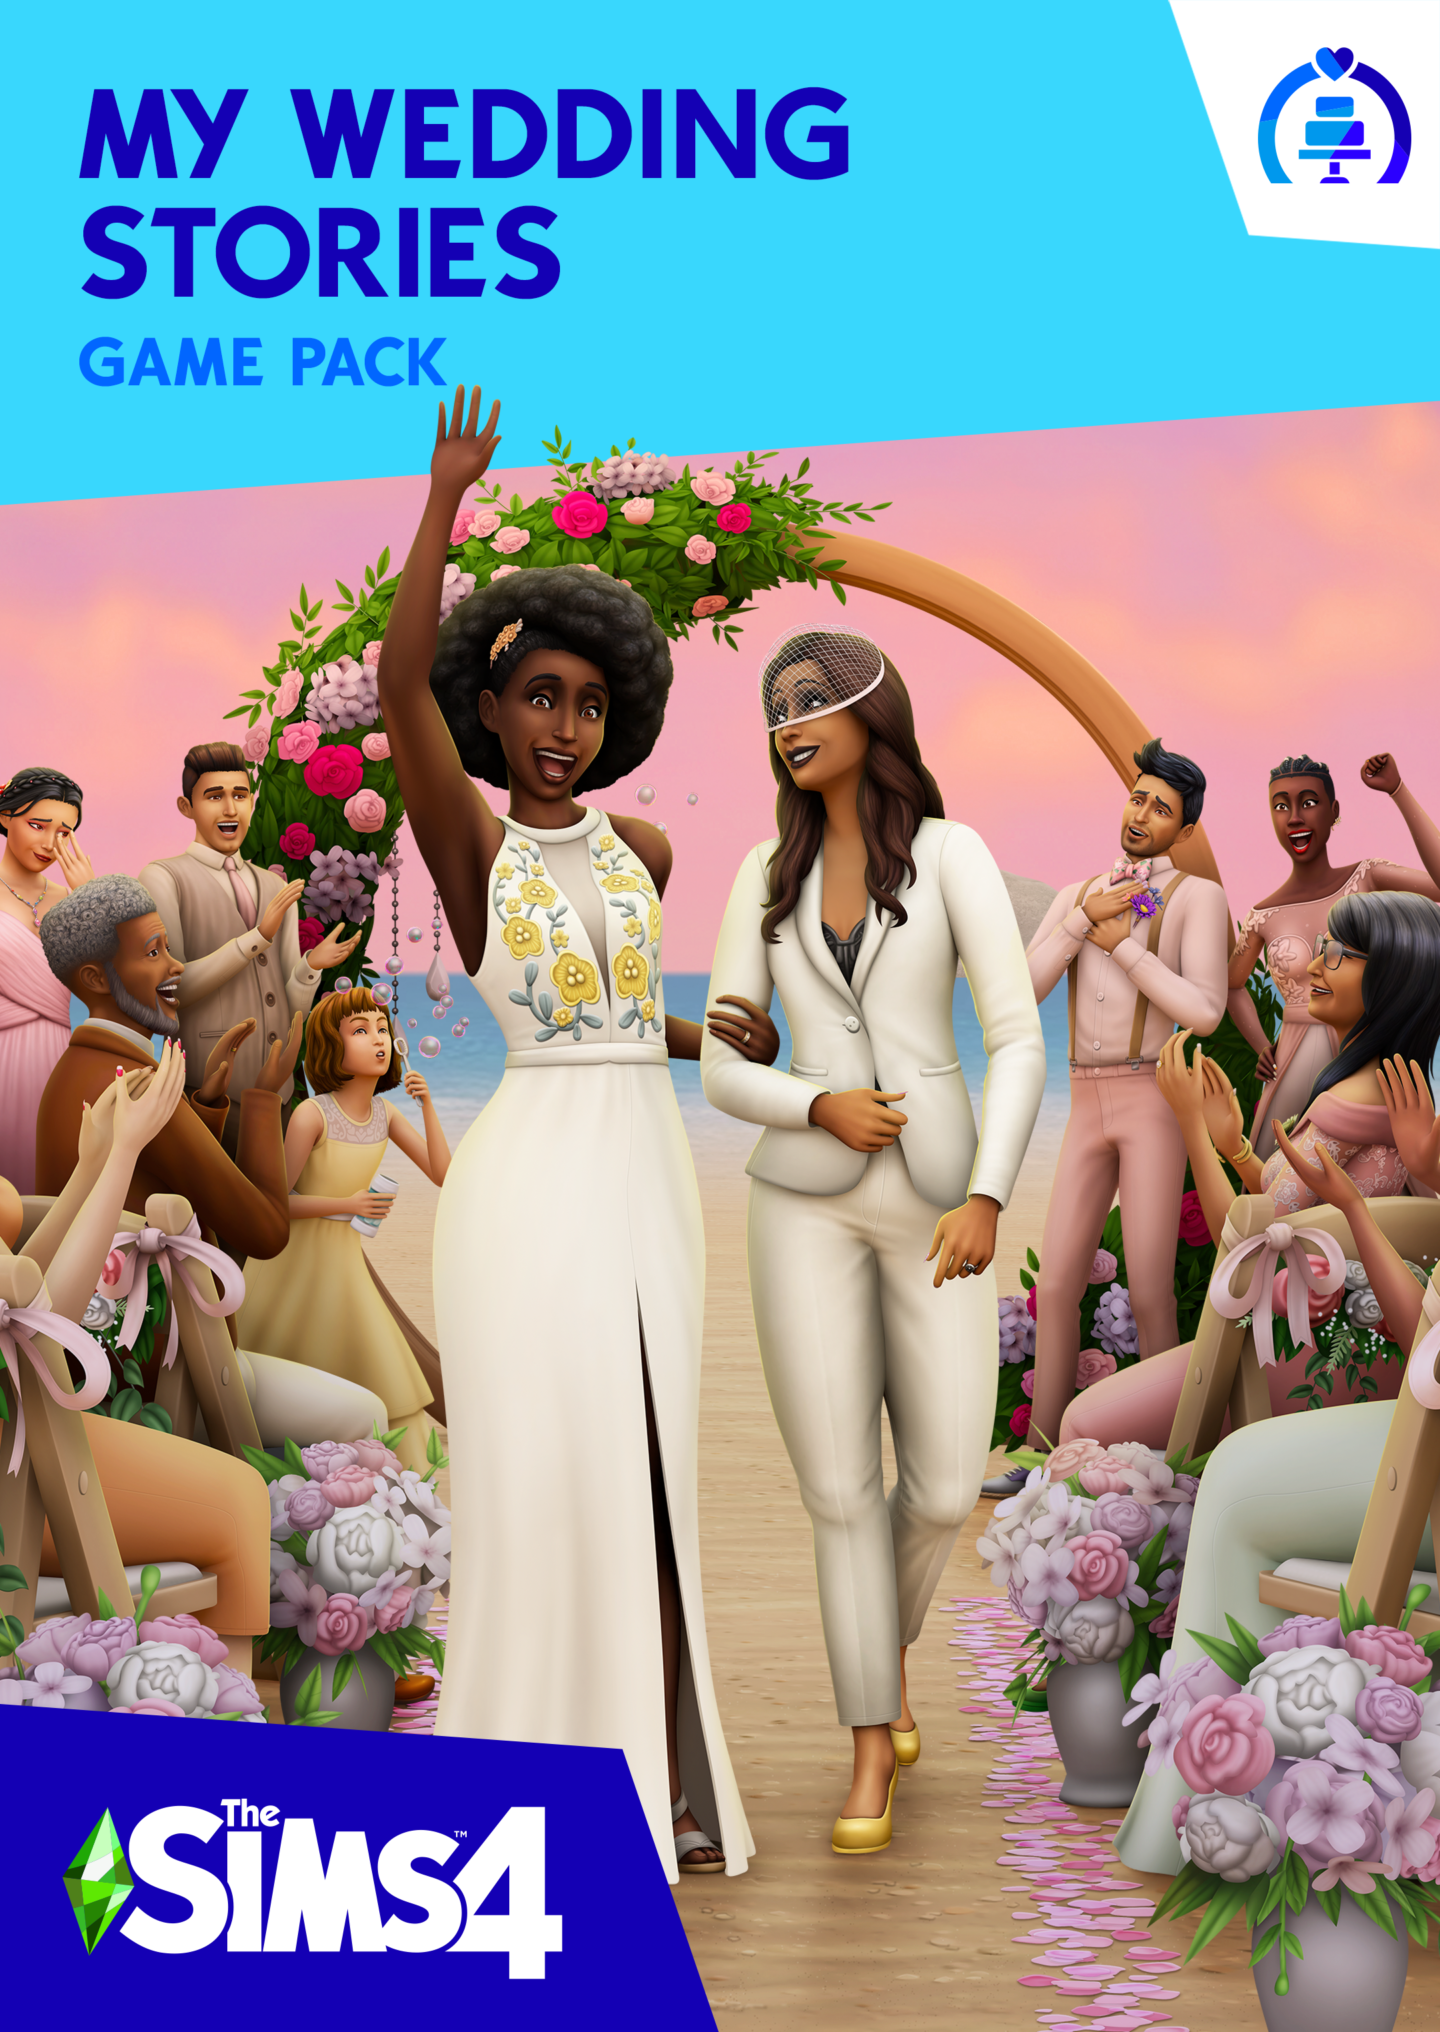 The Sims 4: My Wedding Stories official info and screenshots